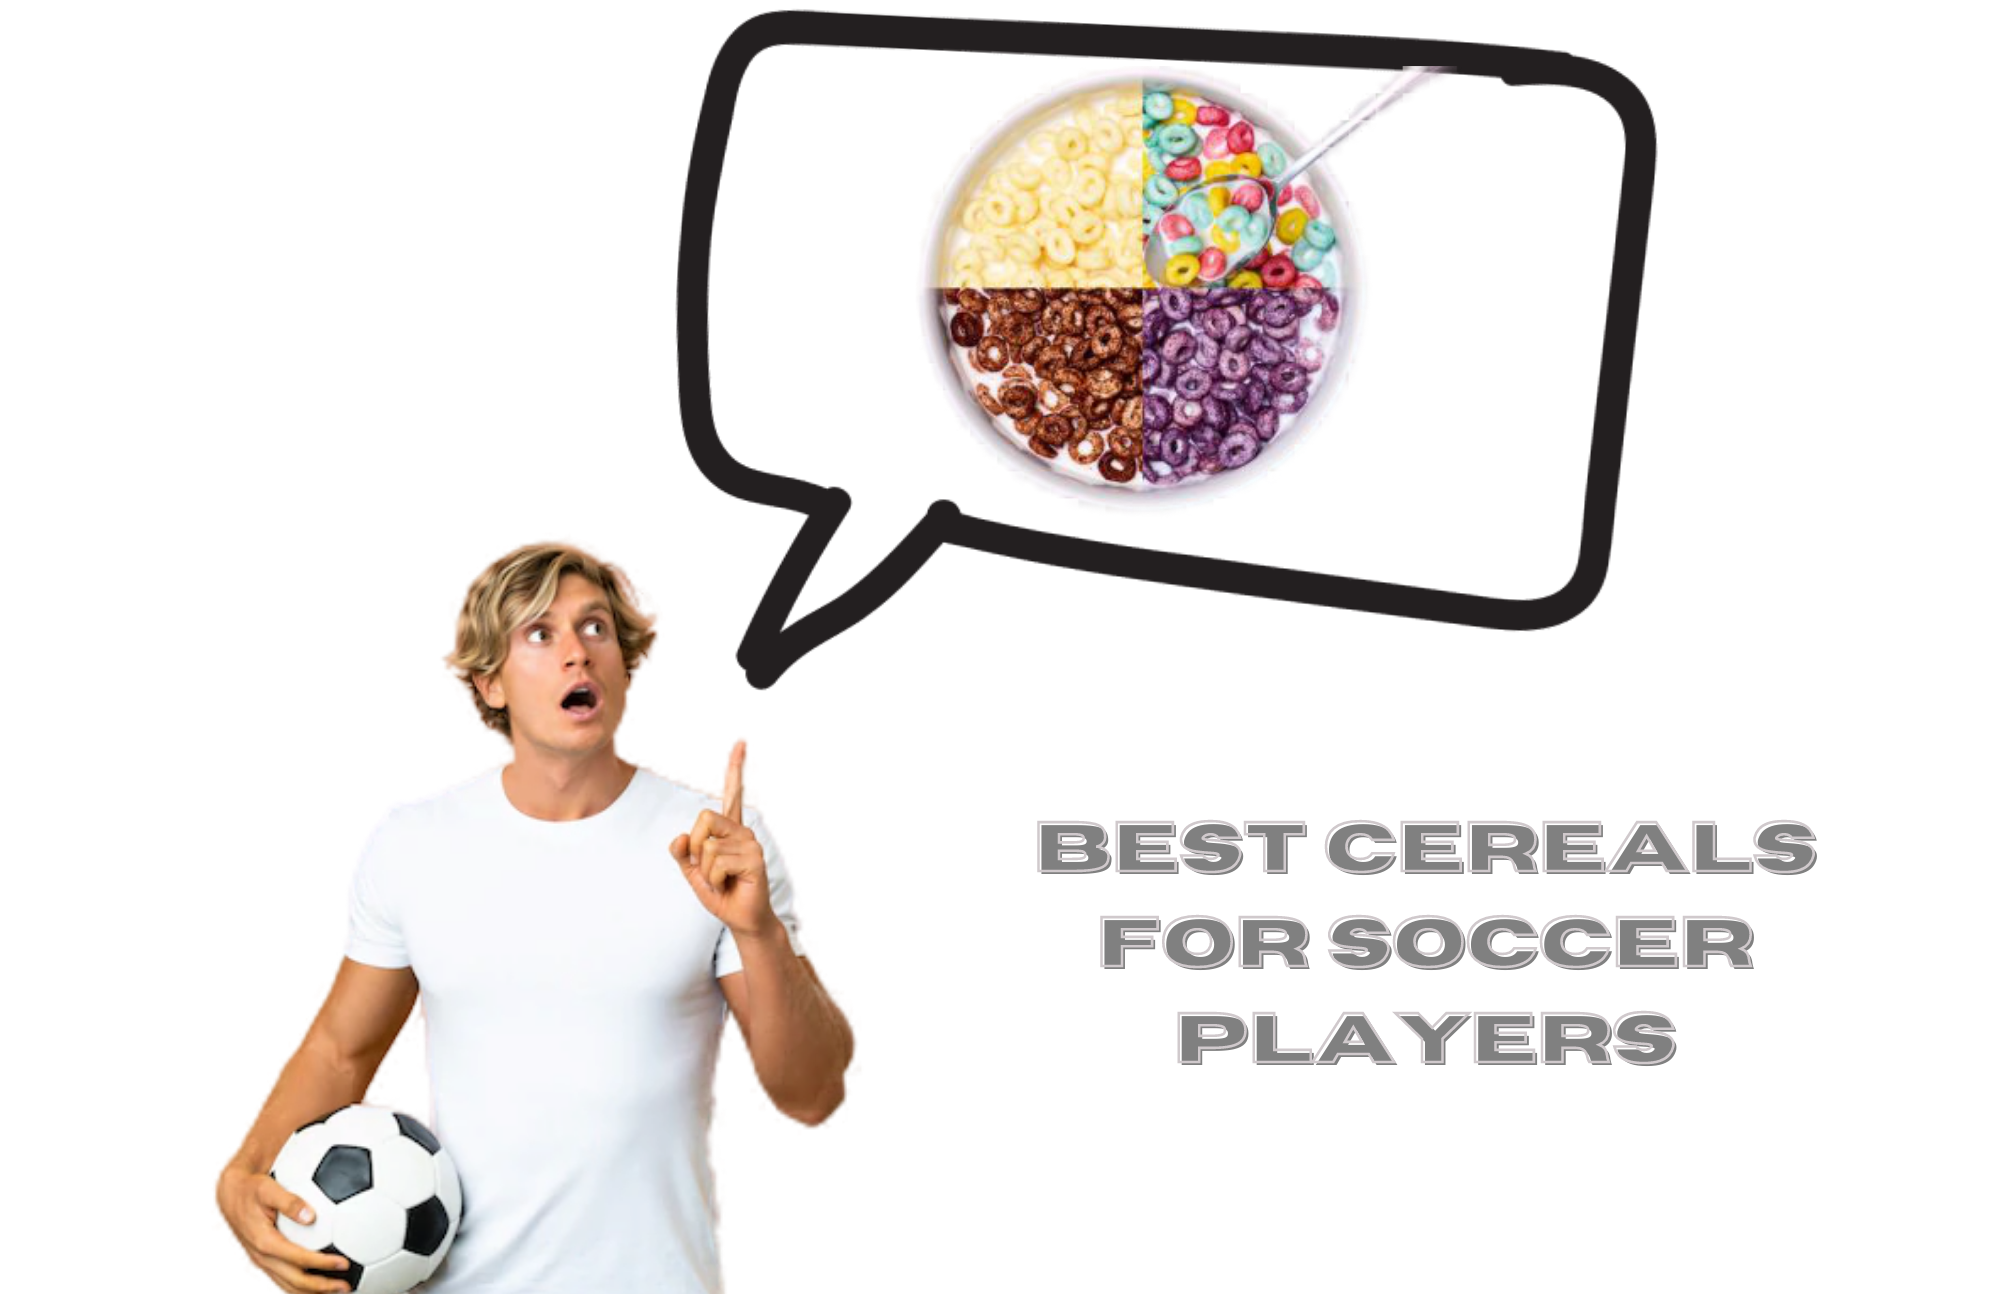 The Best Cereals For Soccer Players That Will Give You The Energy You Need